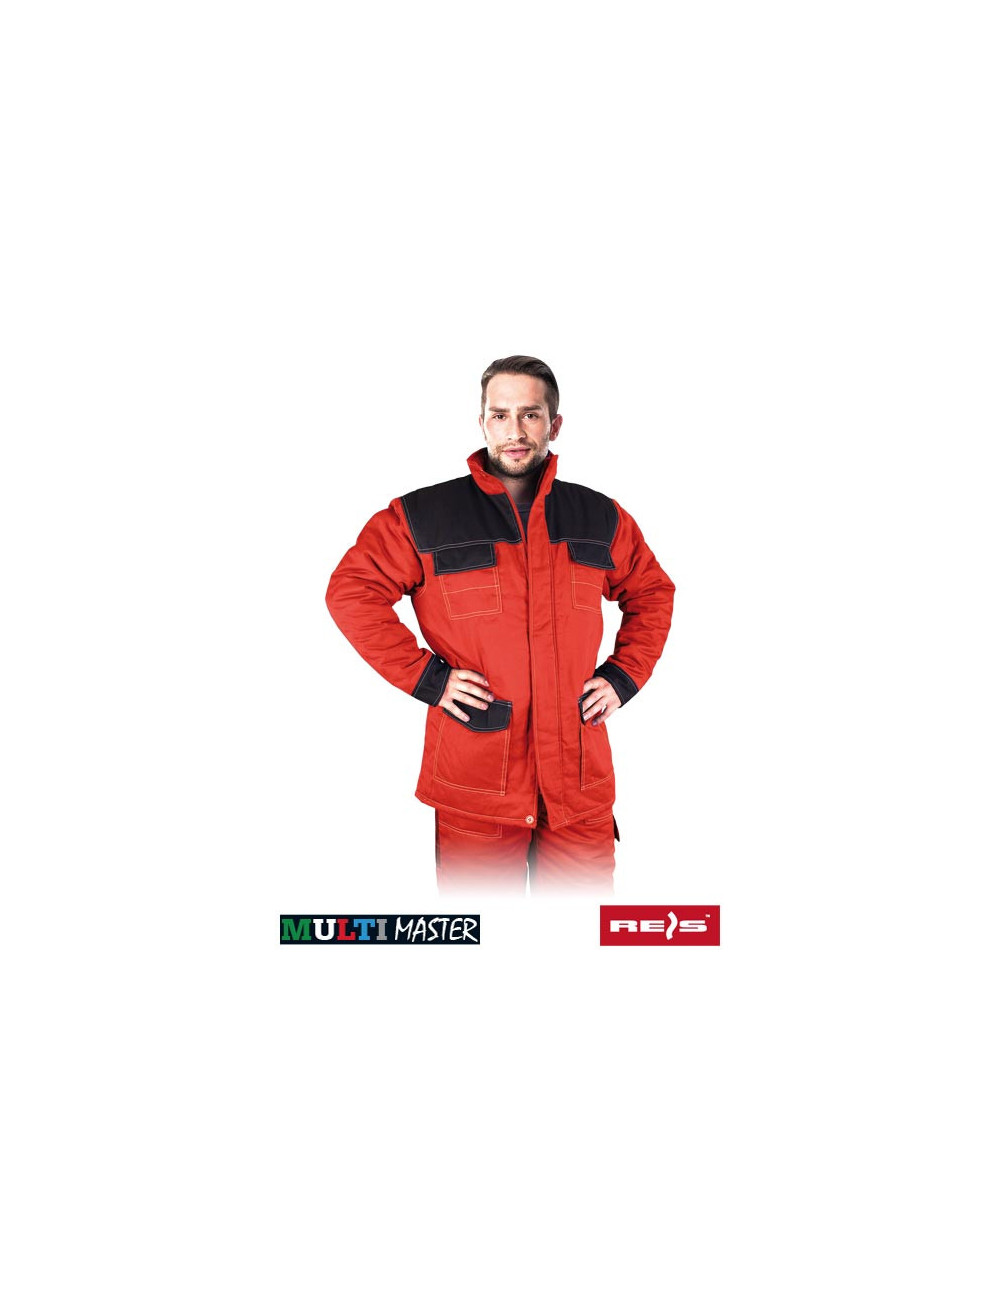 Protective jacket insulated mmwjl cb red-black Reis